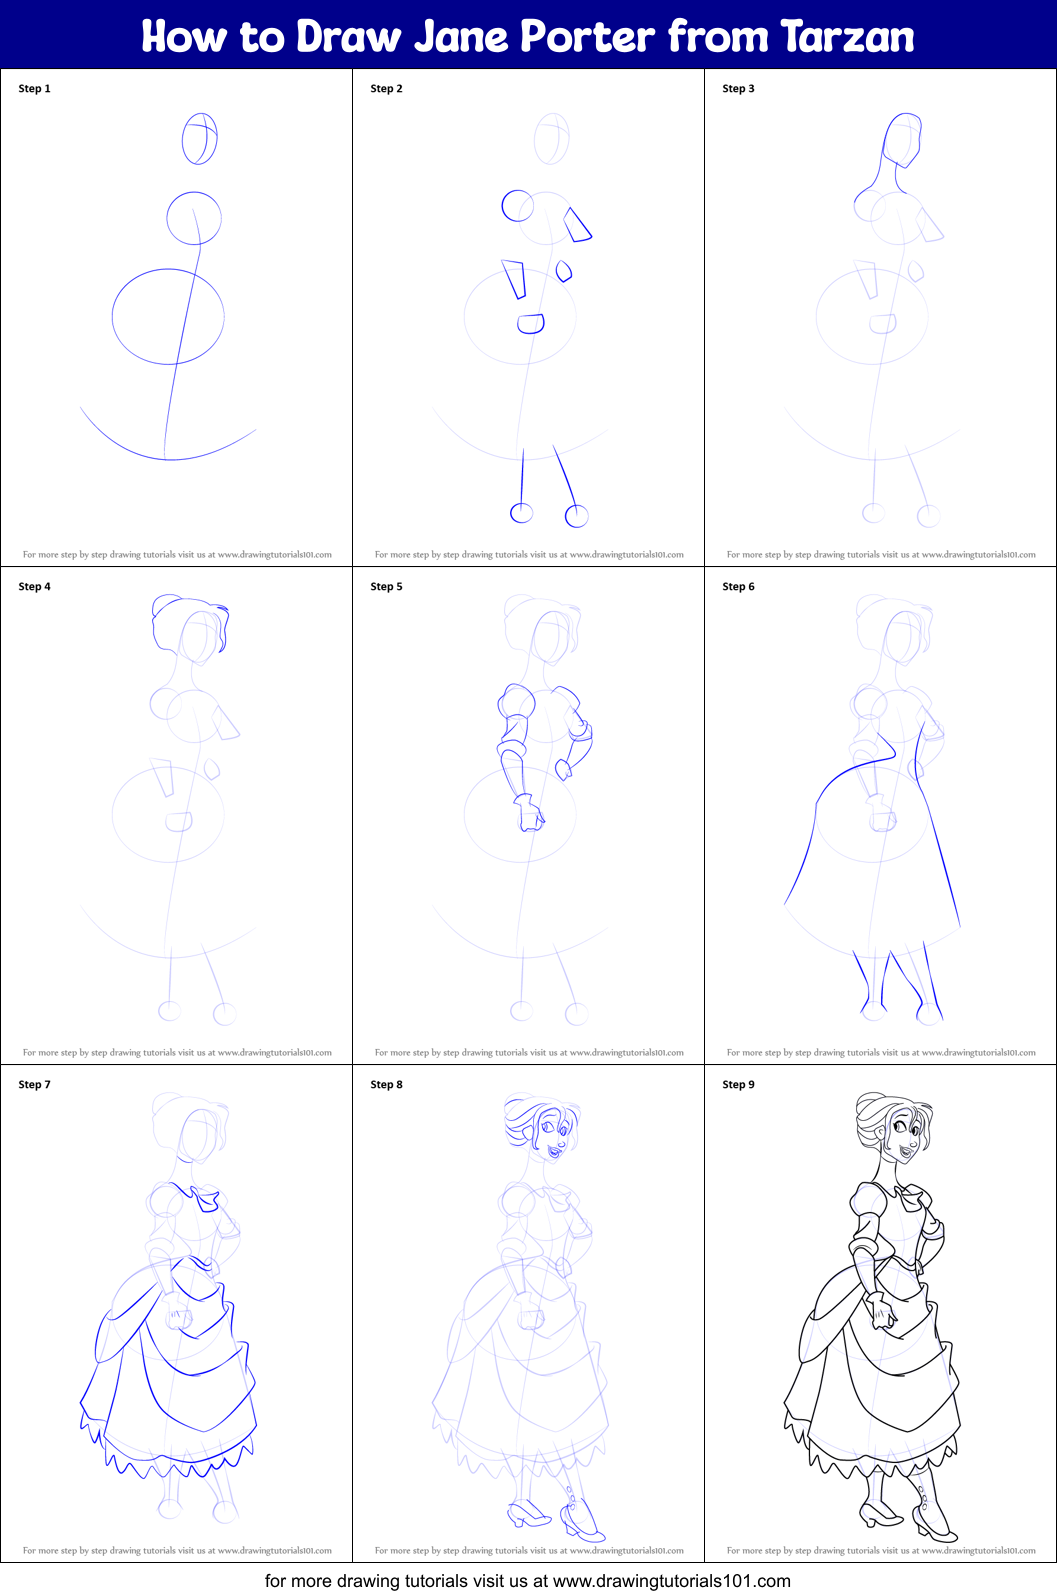 How To Draw Jane Porter From Tarzan Printable Step By Step Drawing Sheet Drawingtutorials101 Com This movie is my life and baby tarzan by sahawkfire on deviantart. how to draw jane porter from tarzan